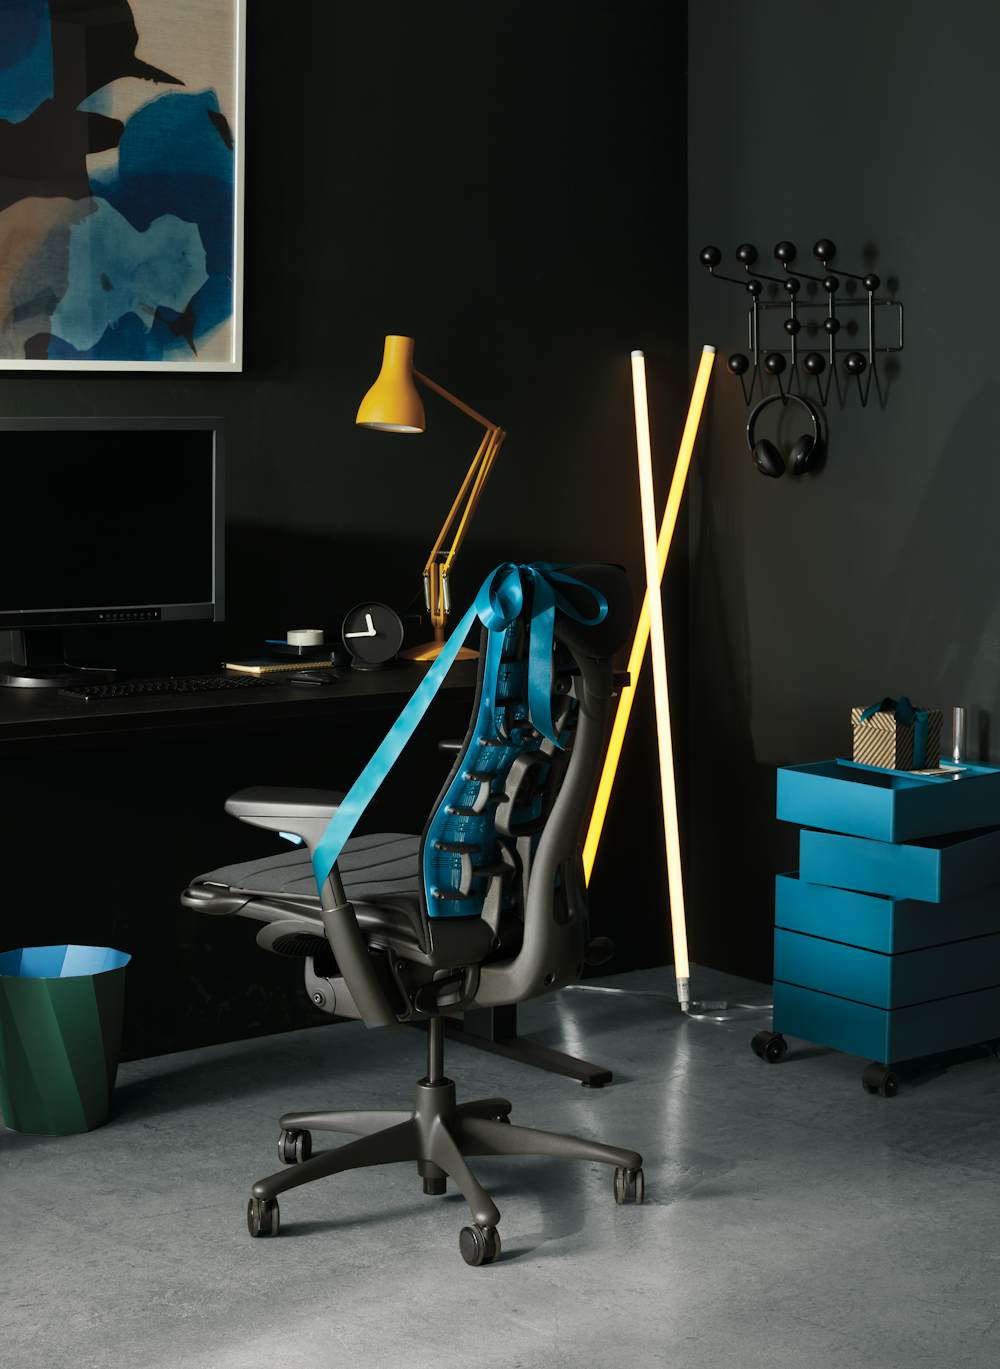 Embody Gaming Chair, Motia Gaming Sit-to-Stand Desk, Type 75 Desk Lamp and Neon Tube LED Lights in a home setting